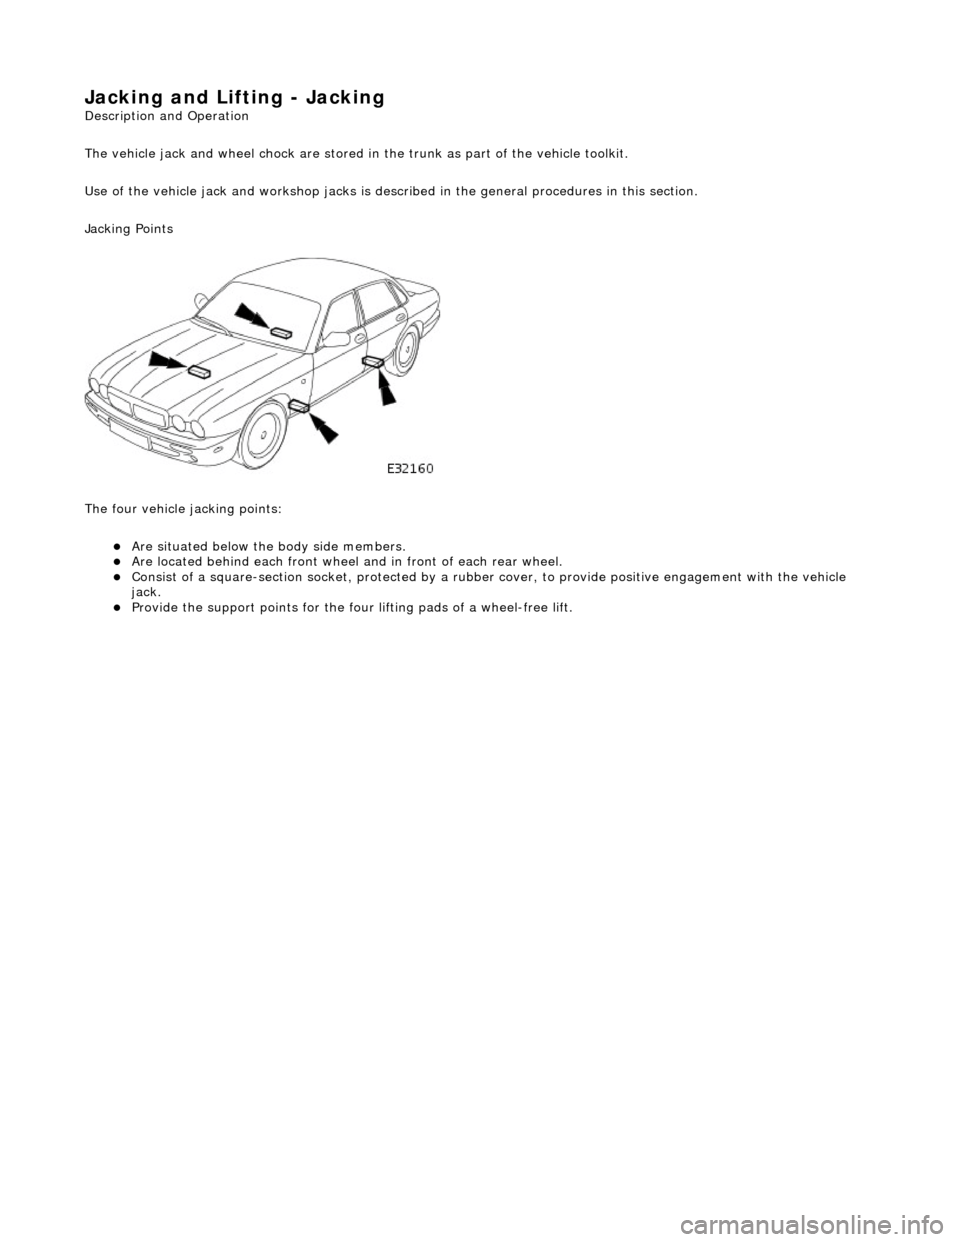 JAGUAR X308 1998 2.G Workshop Manual Jacking and Lifting - Jacking 
Description an
d Operation 
The vehicle jack and wheel chock are stored in the trunk as part of the vehicle toolkit. 
Use of the vehicle jack and workshop jacks is desc 